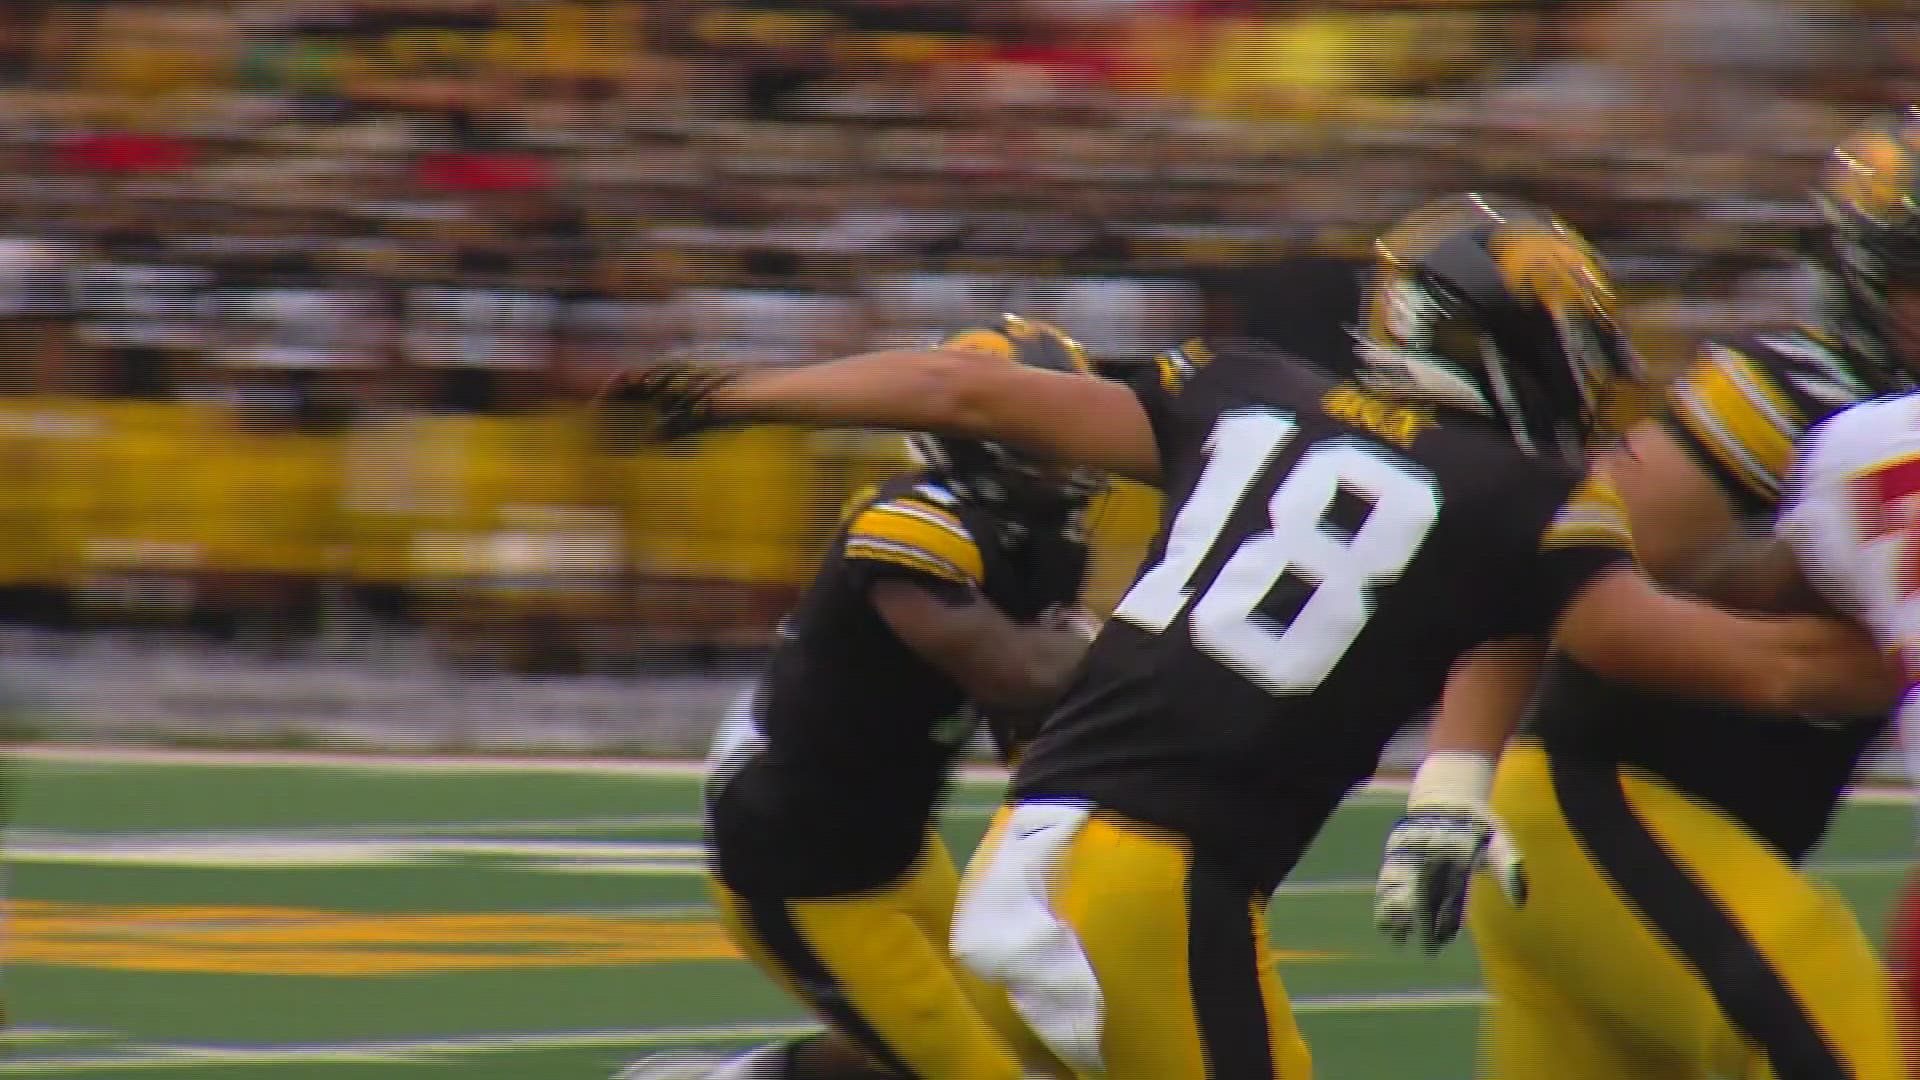 After a blocked punt by Lukas Van Ness, Iowa capitalizes on it with a 9-yard touchdown run by Leshon Williams.